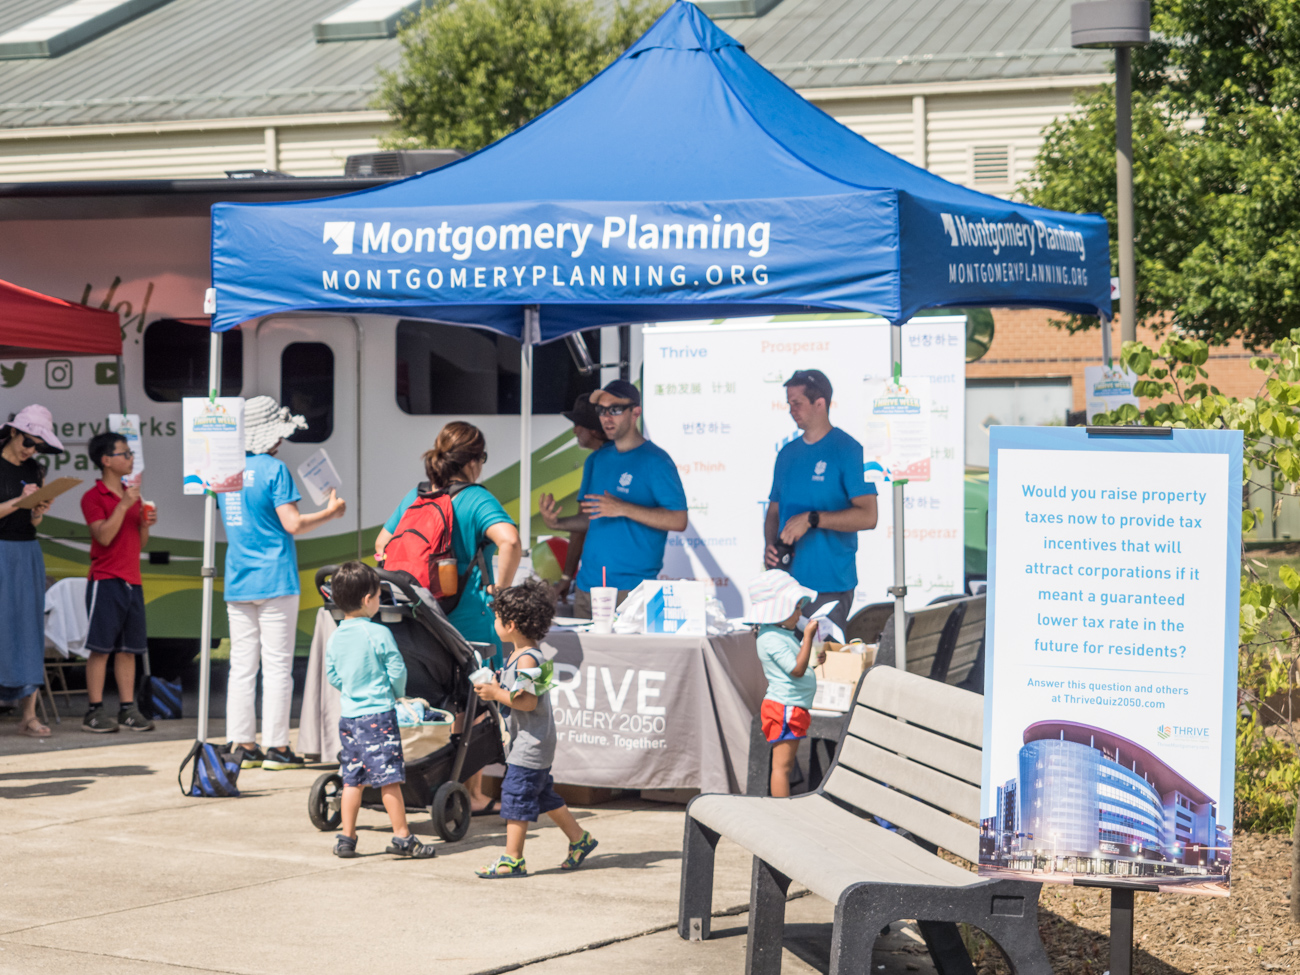 Thrive Montgomery Day 3 at the Germantown Recreational Park Splash Park and mini golf in Germantown held June 28, 2019.